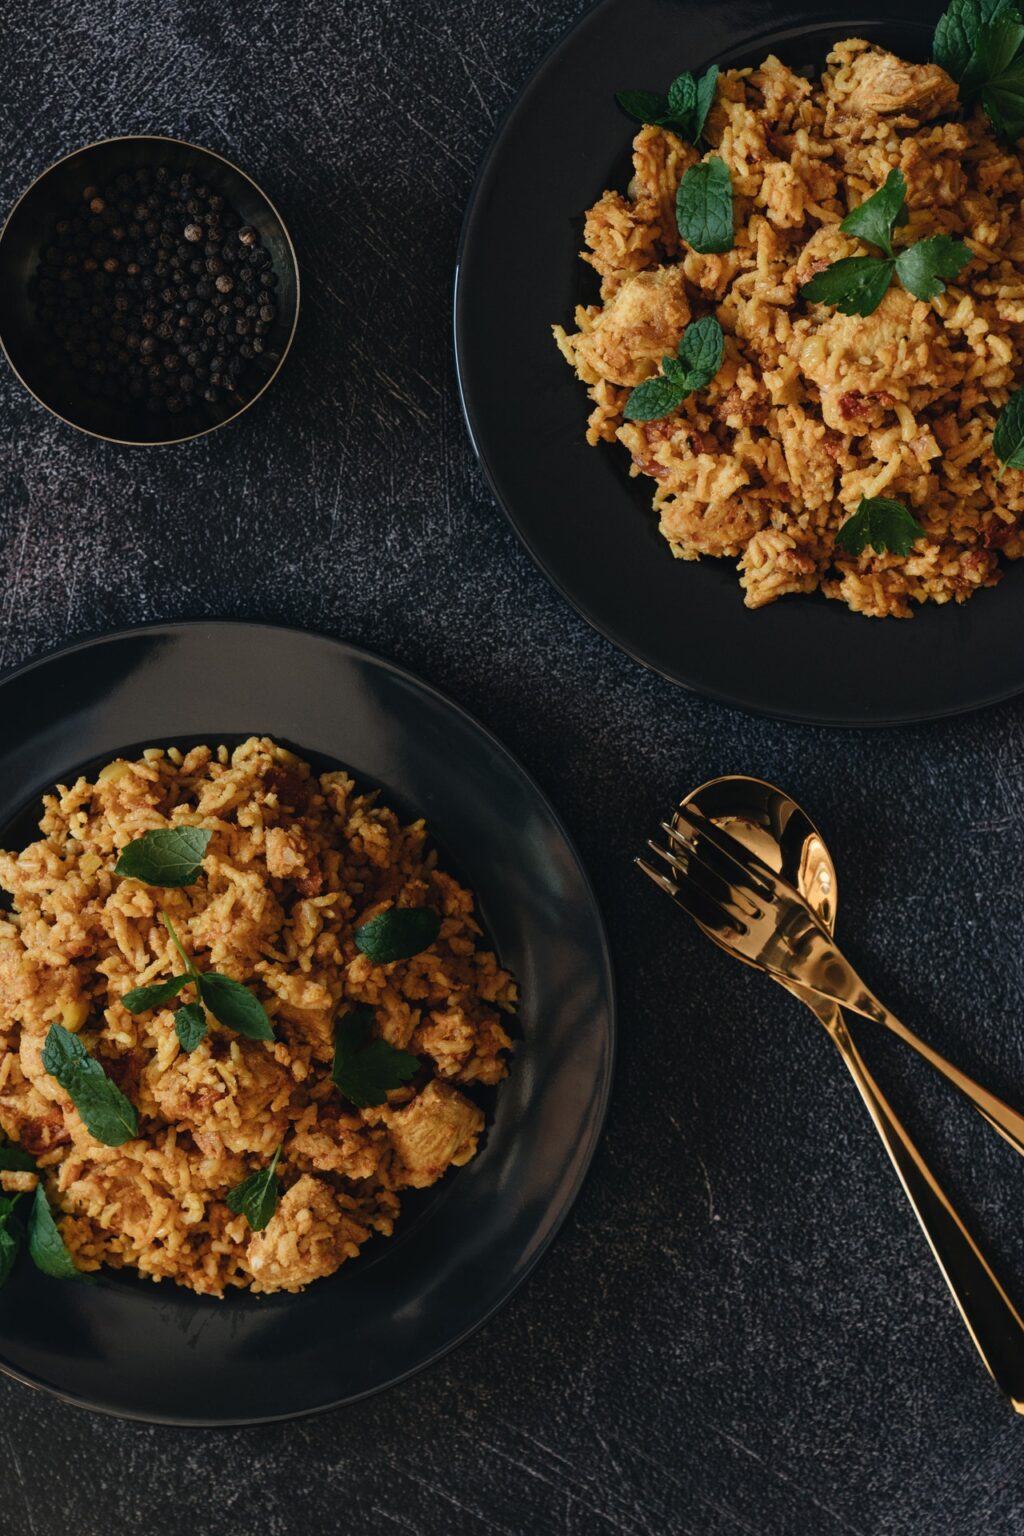 Fried Rice: A simple, cost-effective, no-waste recipe